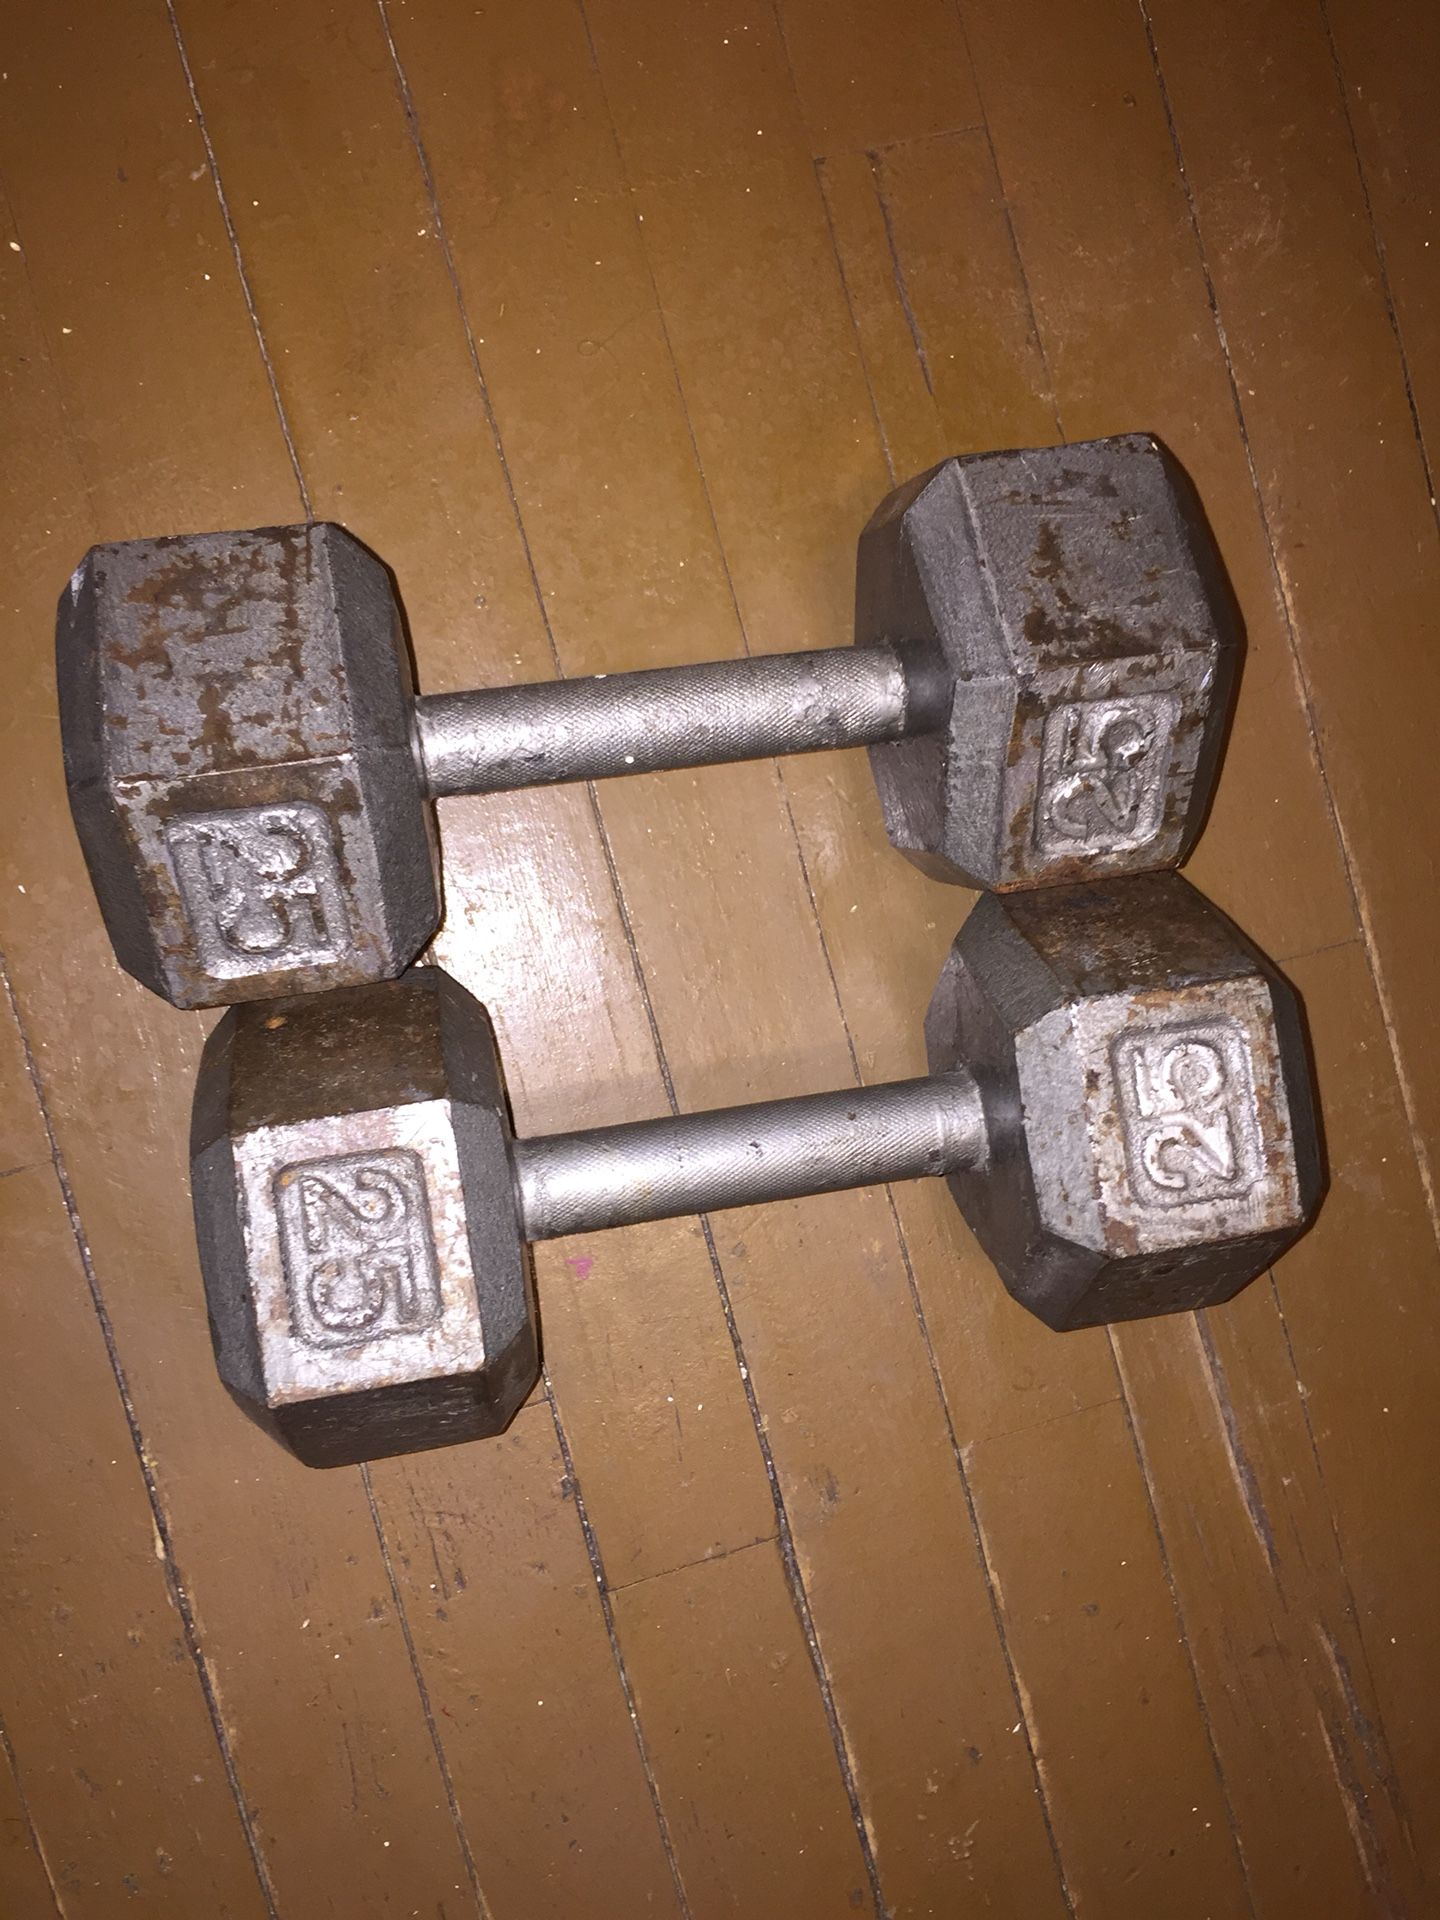 I’m selling these 25 pound dumbbells, 2 for 40$, pick up only